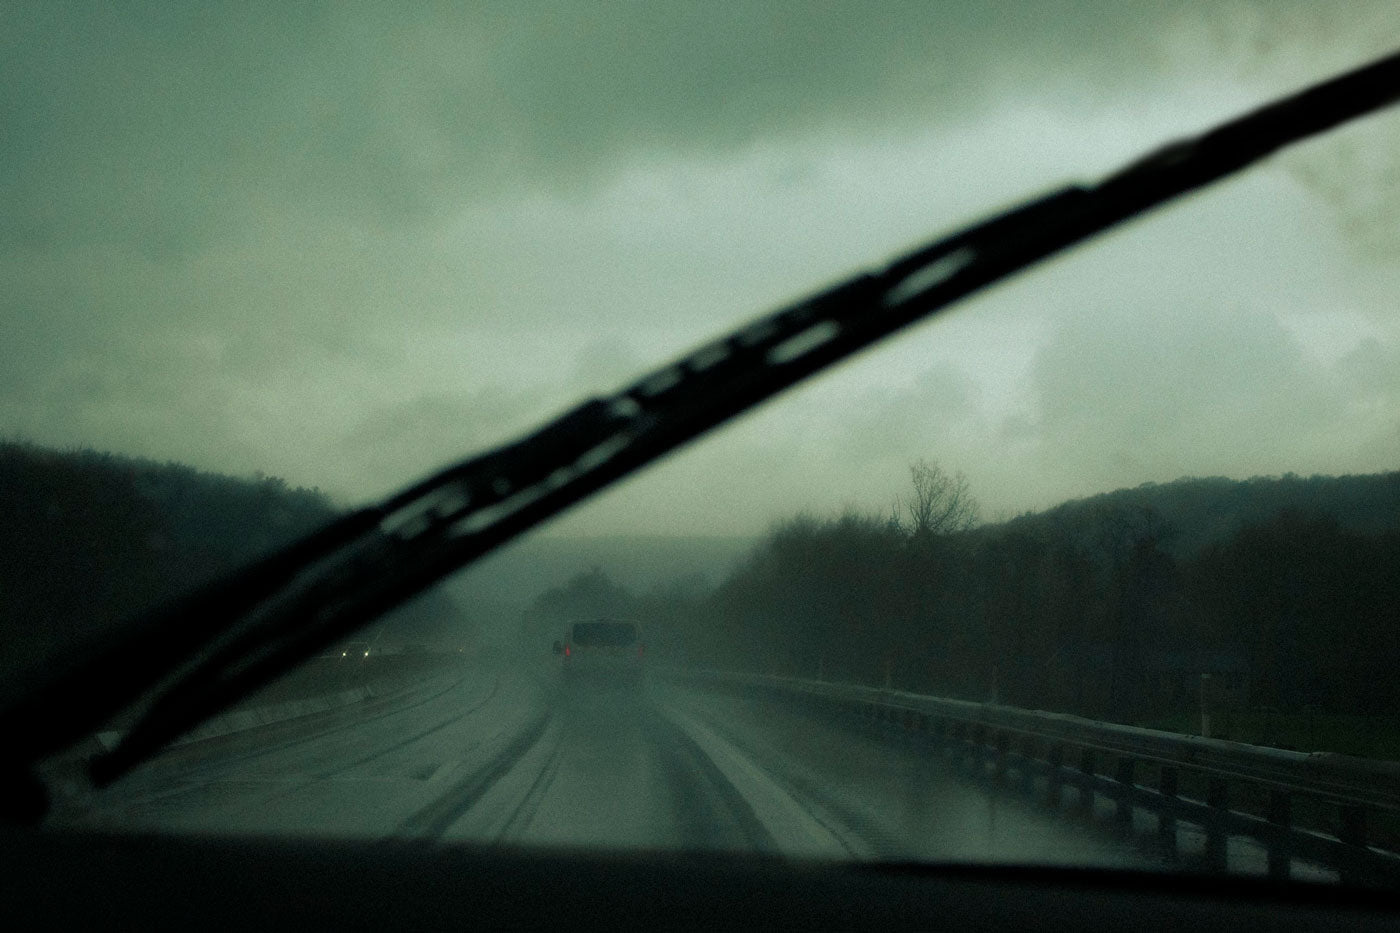 Photograph taken while driving through the windshield of car with wipers on in the rain